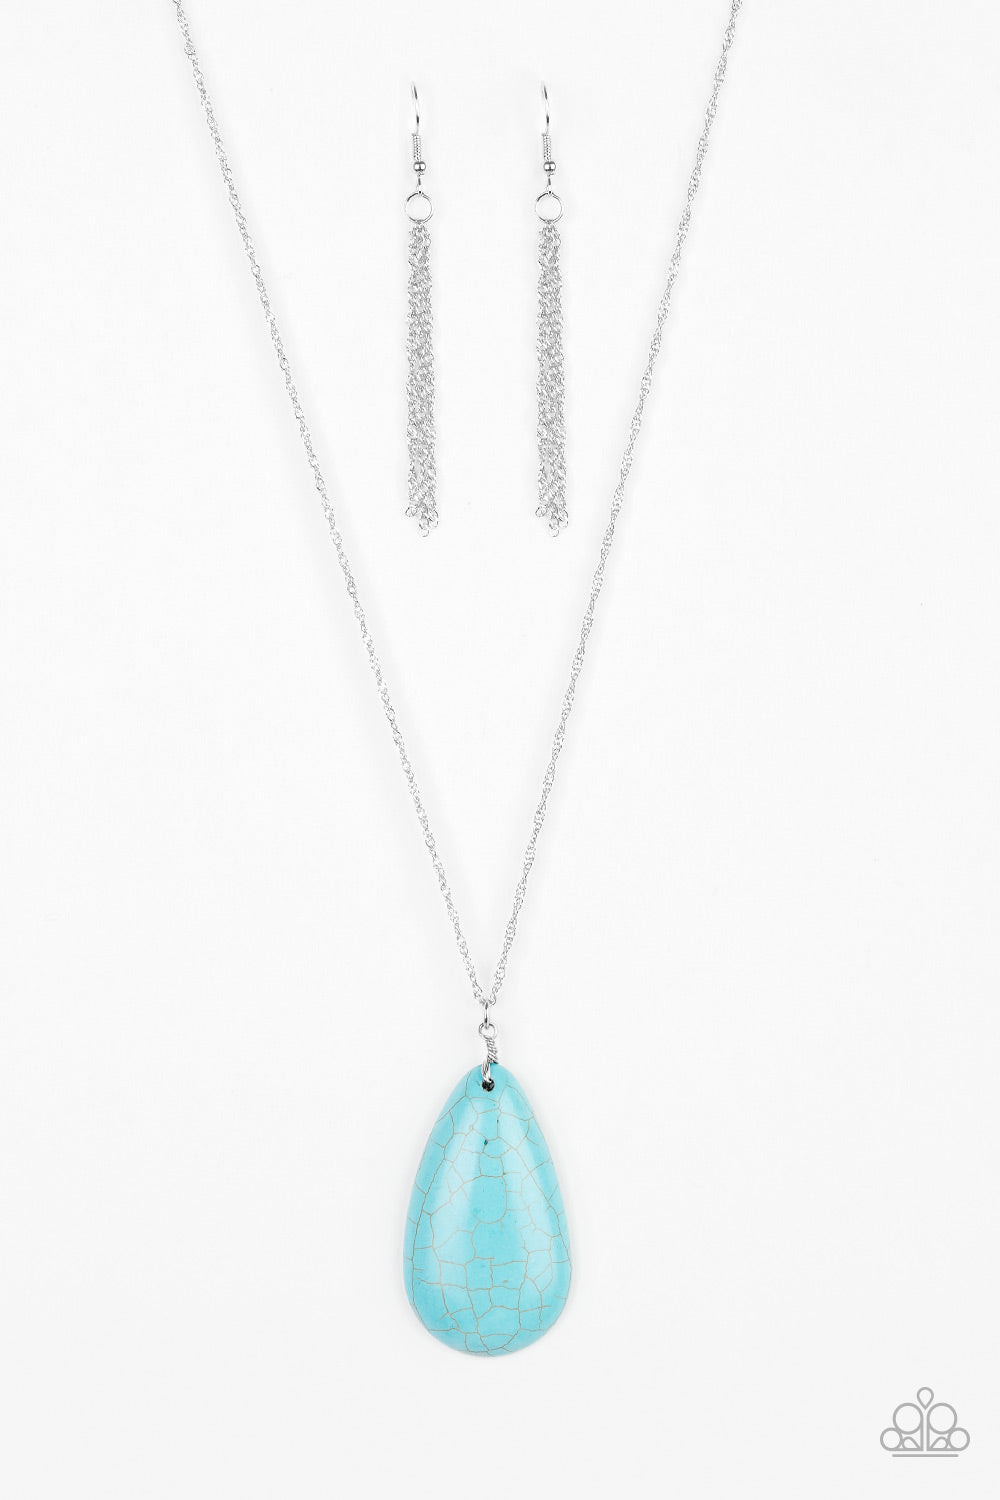 STONE RIVER - TURQUOISE NECKLACE